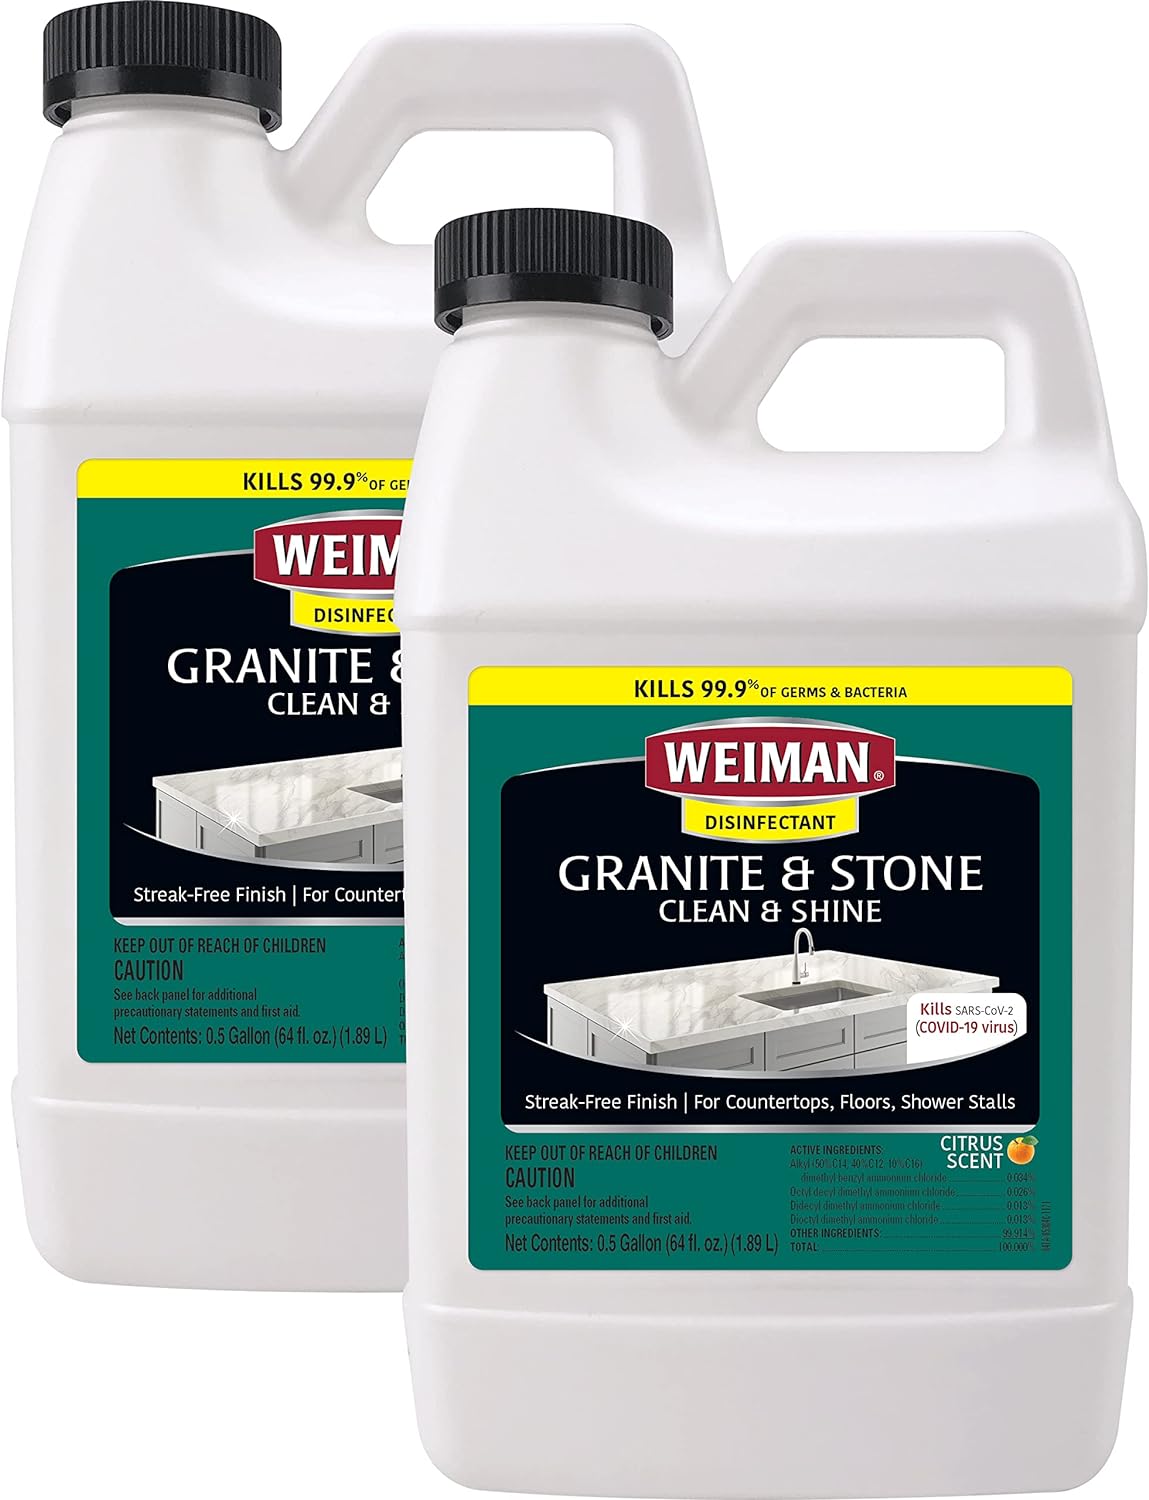 Weiman Disinfecting Granite Cleaner and Polish - 64 Ounce (2 Pack) Safely Cleans and Shines Granite Marble Quartz Quartzite Slate Limestone Corian Laminate Tile Countertop